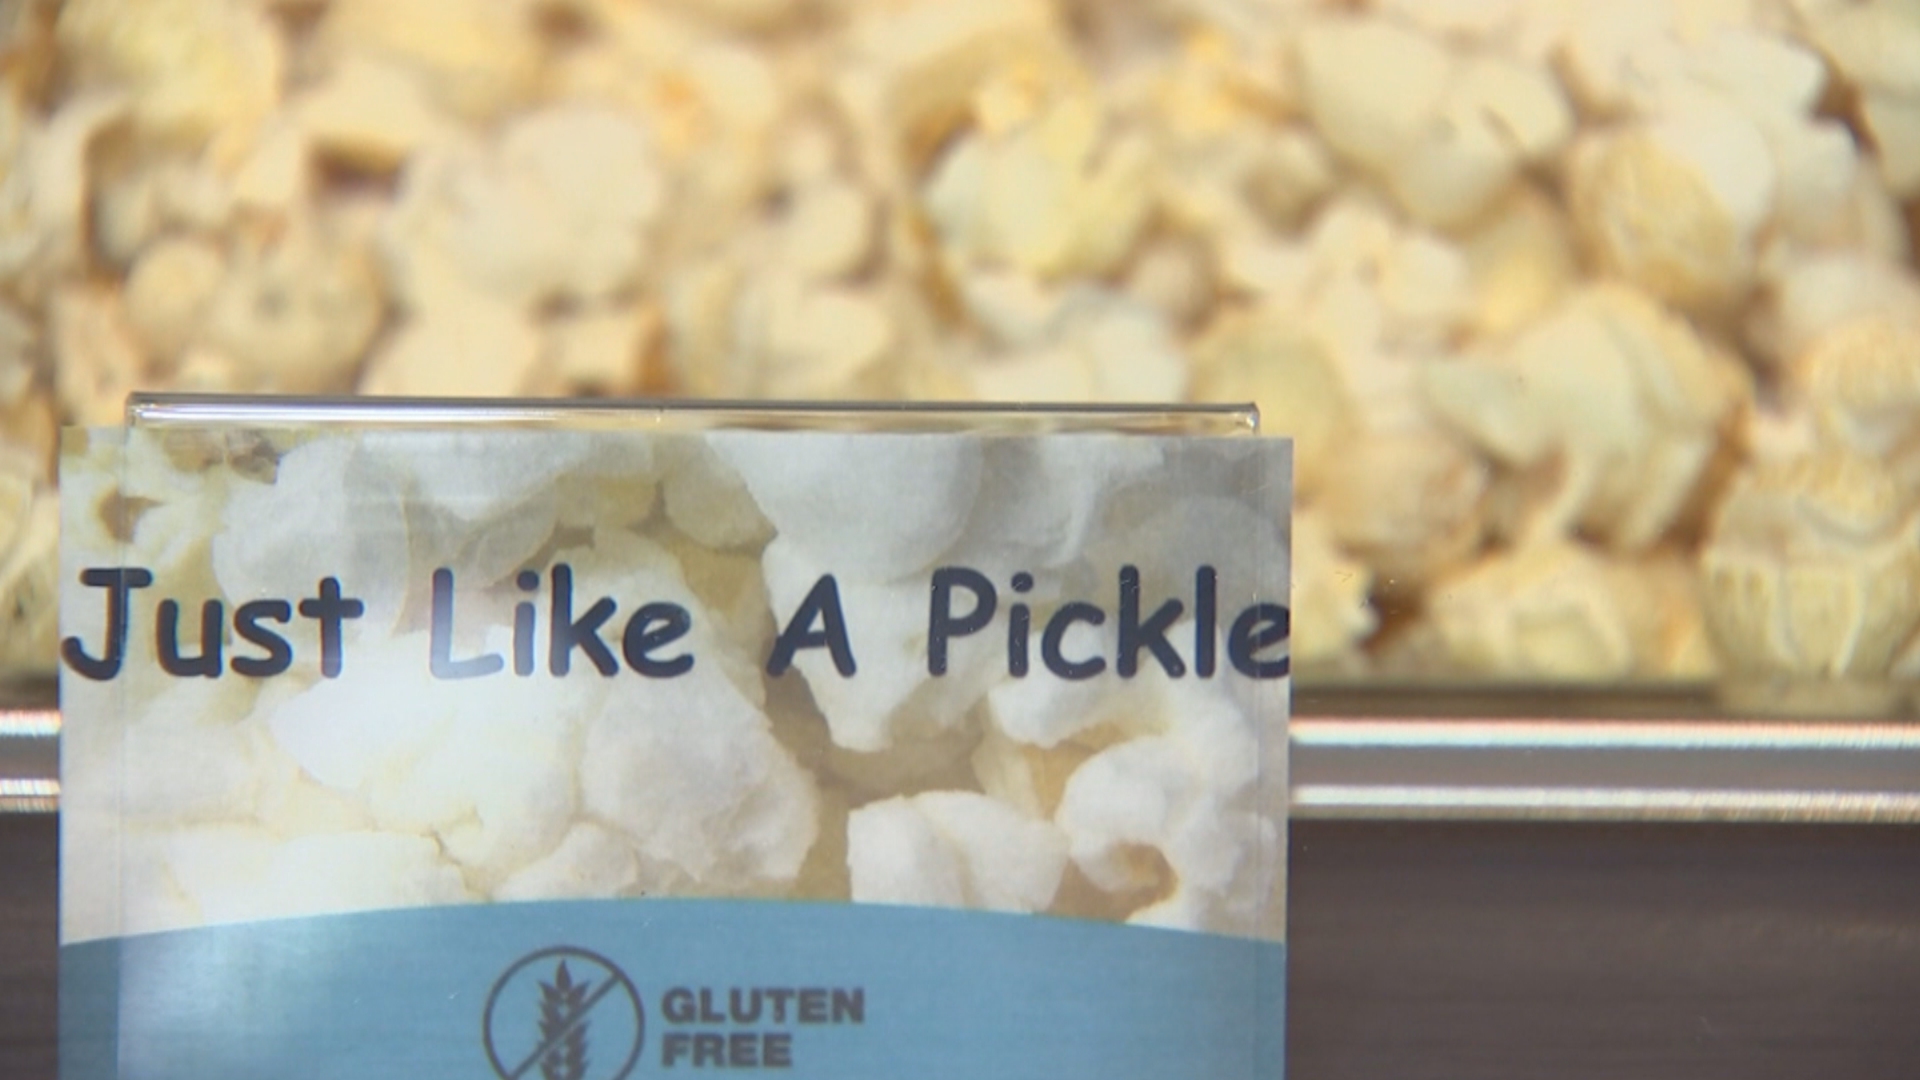 Clusters Handcrafted Popcorn Adds Unique Twist On Favorite Snack On Wildwood Boardwalk – CBS Philly